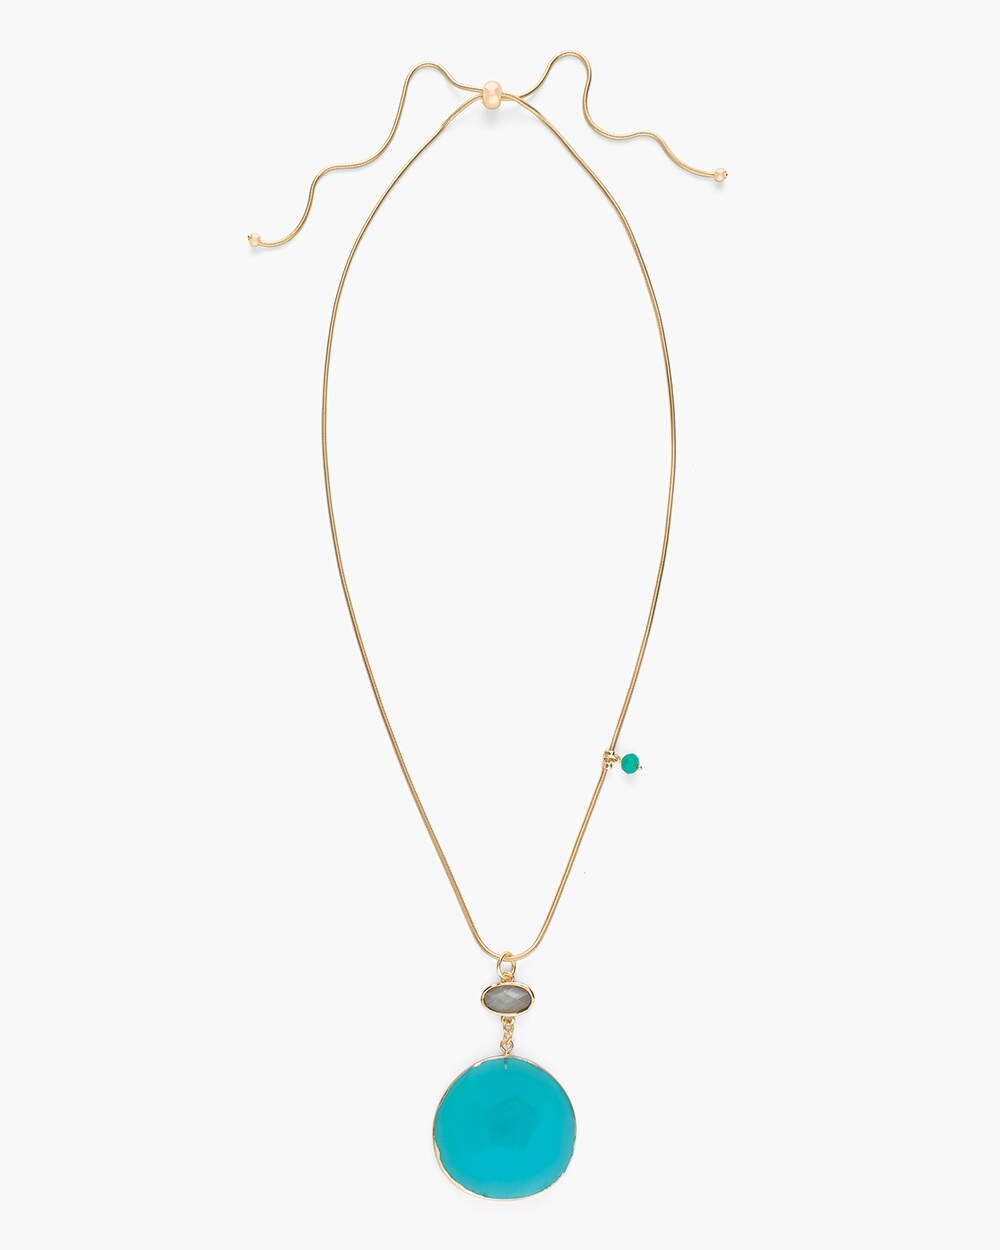 Convertible Teal Pendant Necklace